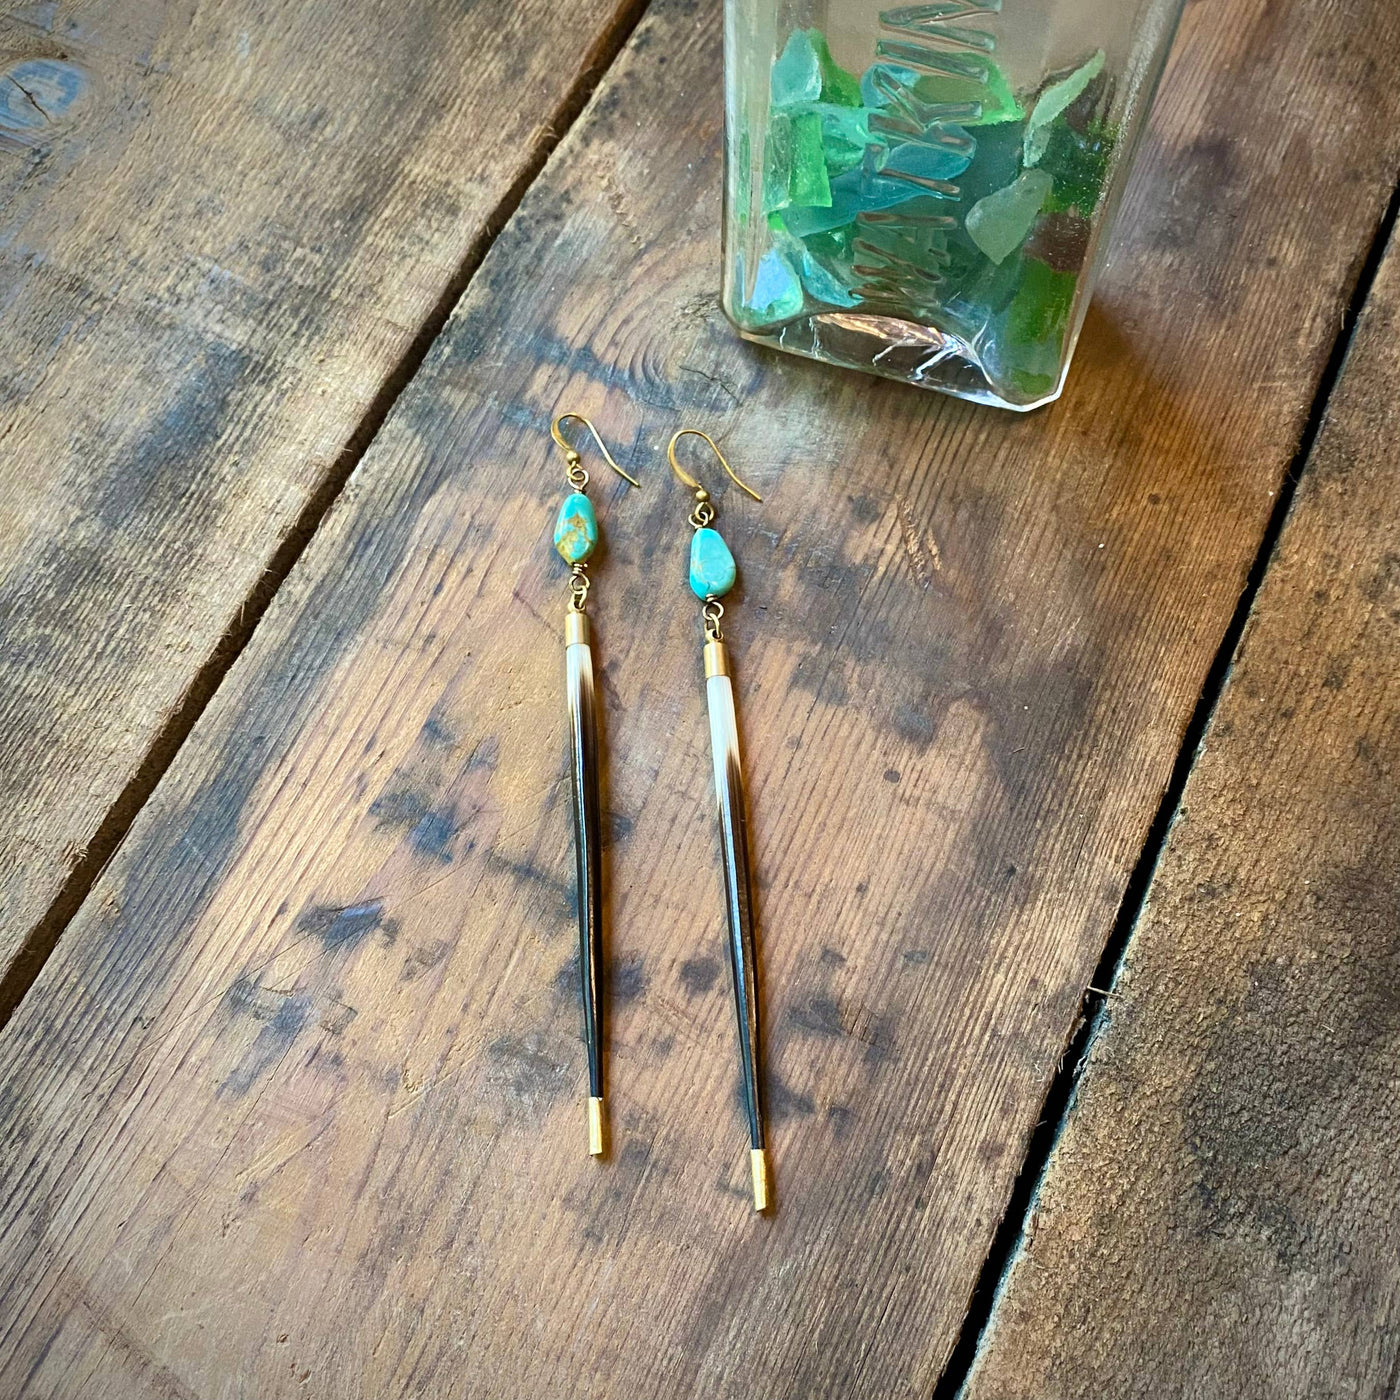 Porcupine Quill & Turquoise Earrings: Turquoise